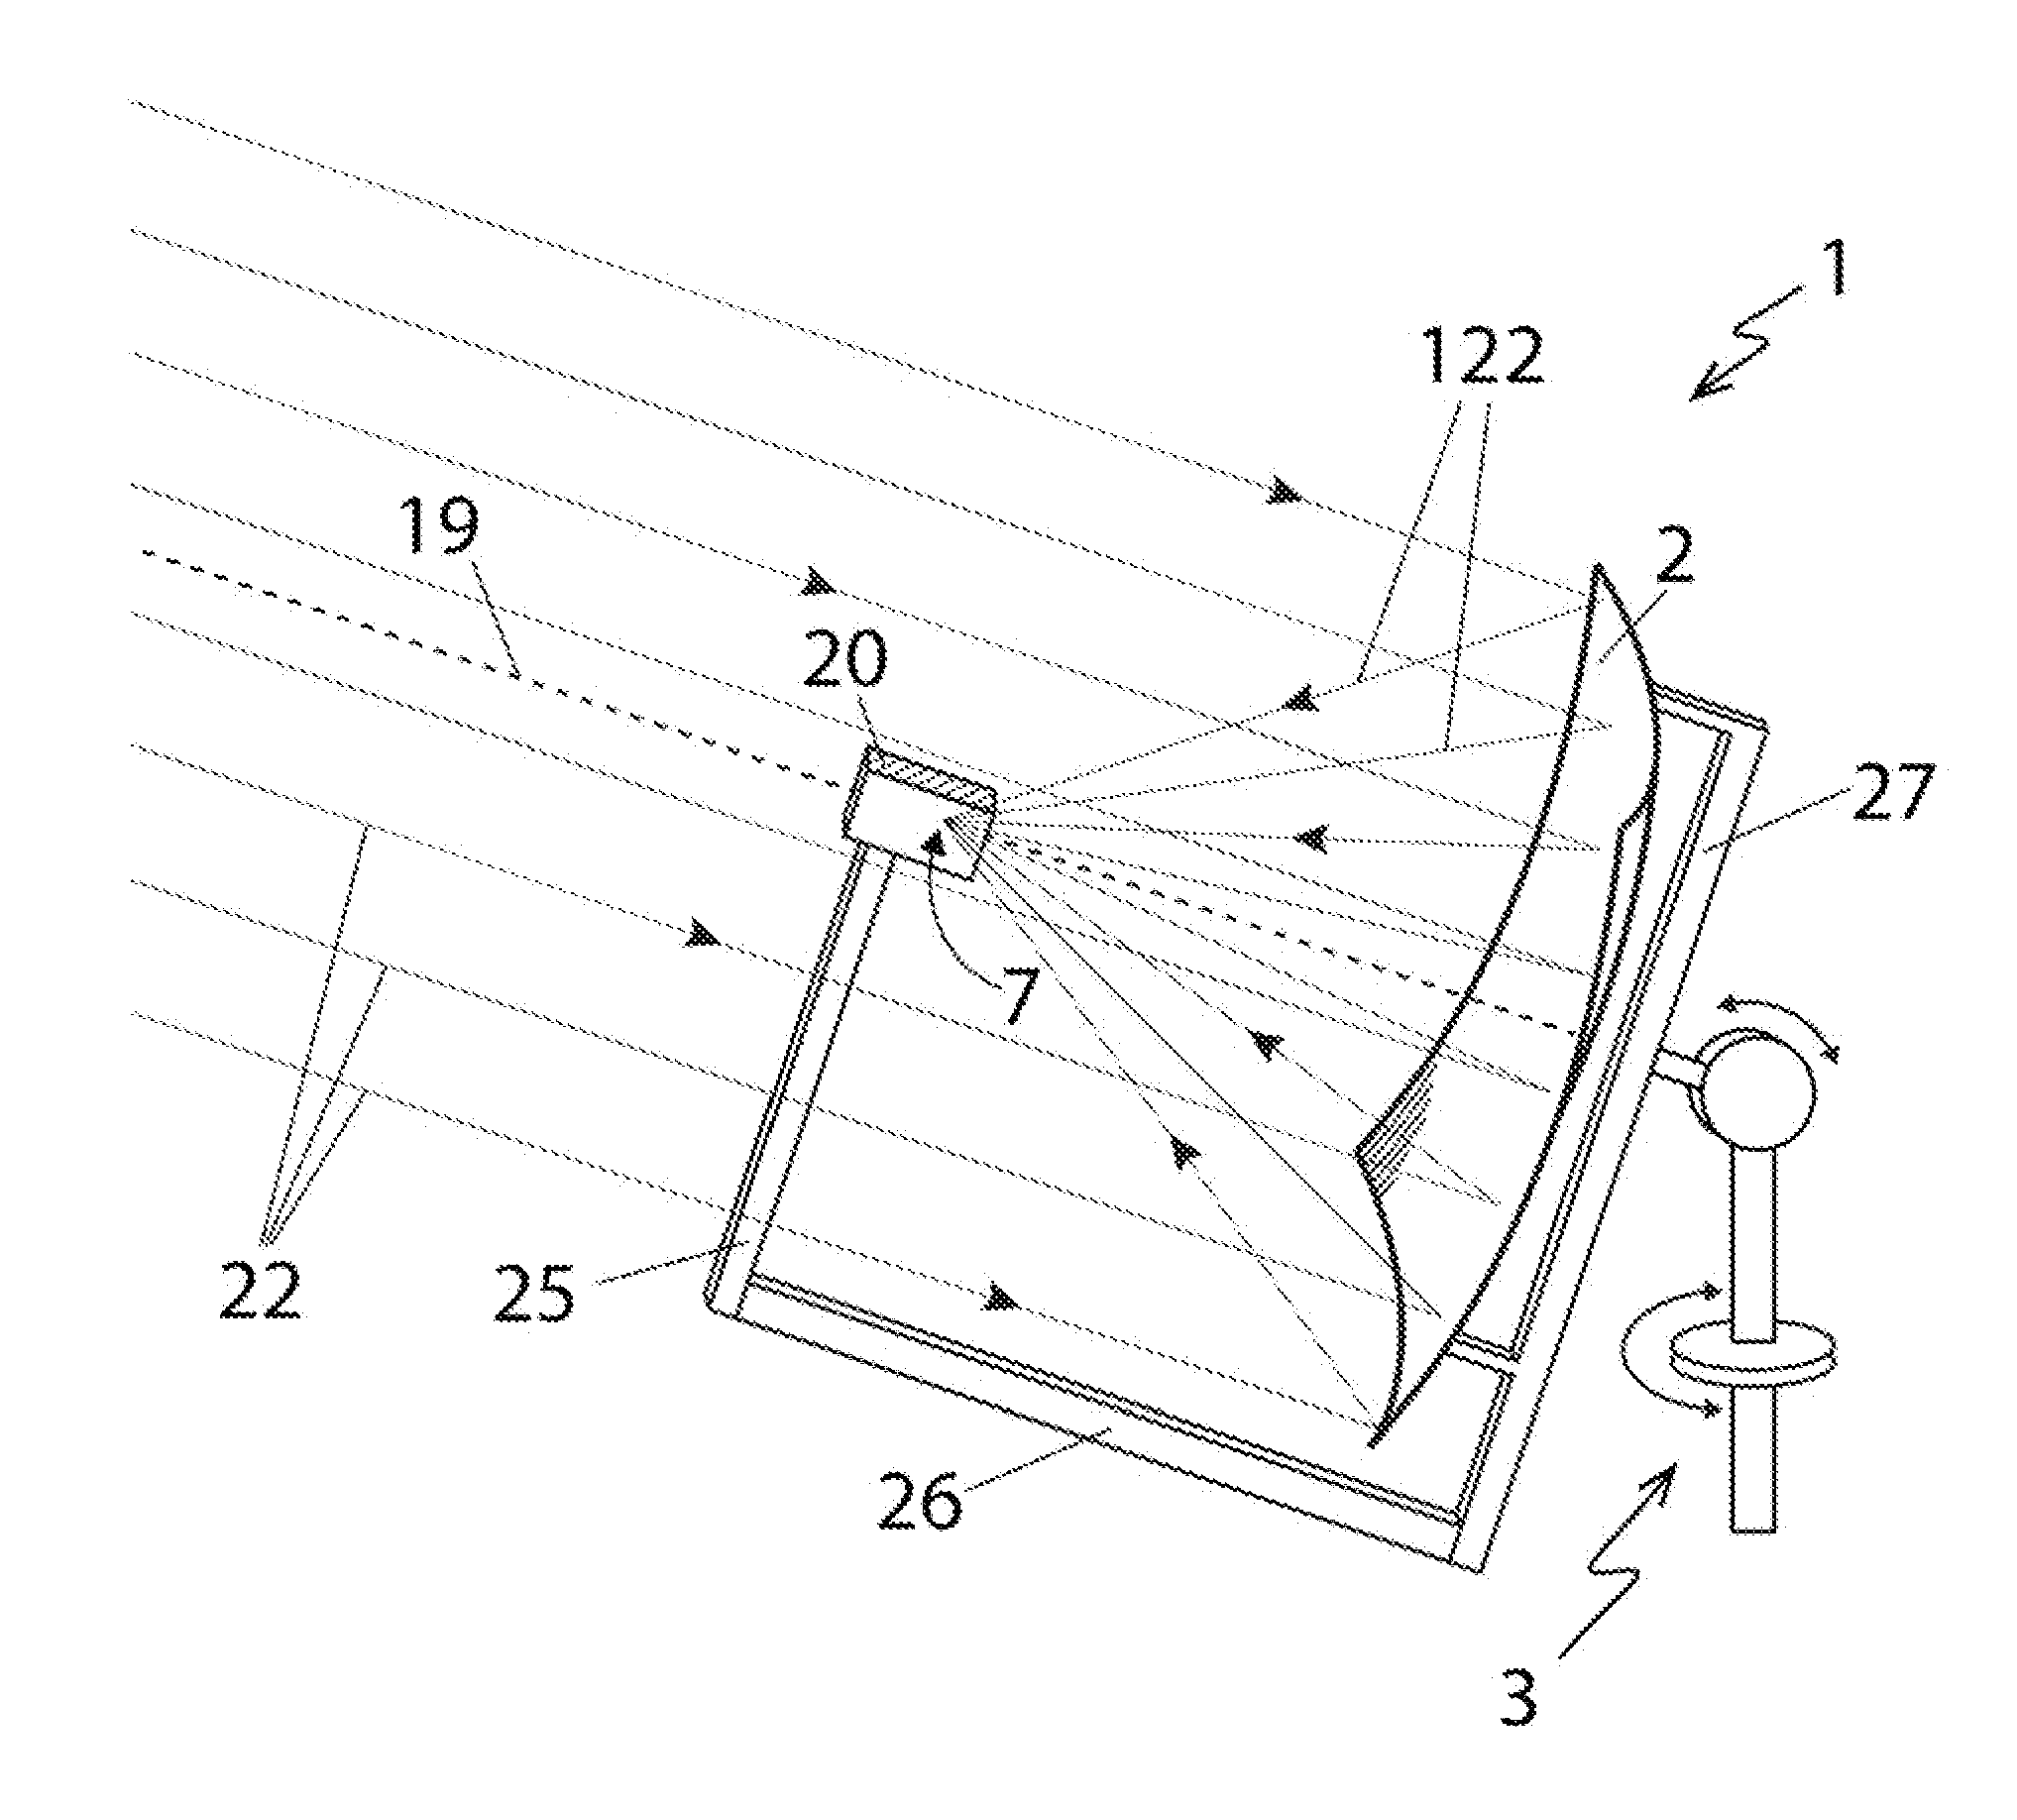 Solar generator with large reflector dishes and concentrator photovoltaic cells in flat arrays